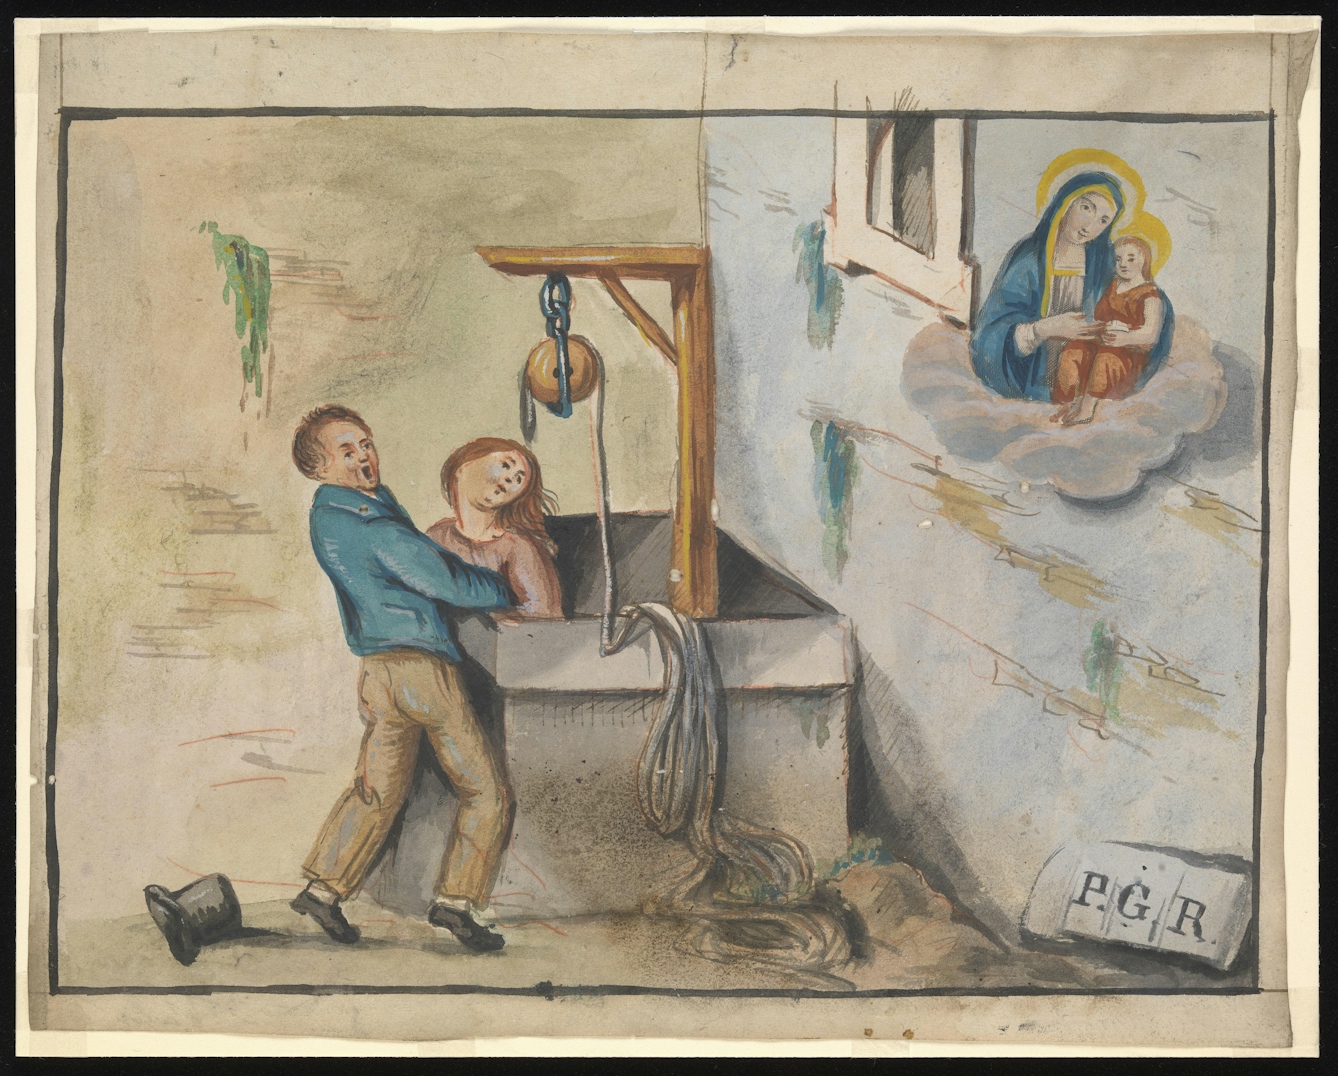 Watercolour painting. The image shows a man rescuing a woman whose lower body is trapped in a well.  The man is wearing a blue jacket, brown trousers and his top hat has fallen to the floor. He is shouting for help. The woman is wearing a pink dress and has auburn hair - she looks distressed. Above her head is the well pulley system.To the right of the couple, there is a building wall and upon this is an image of the Virgin Mary and Jesus on a cloud. The woman who is trapped is praying for help. Text at the bottom write reads 'PGR'. 